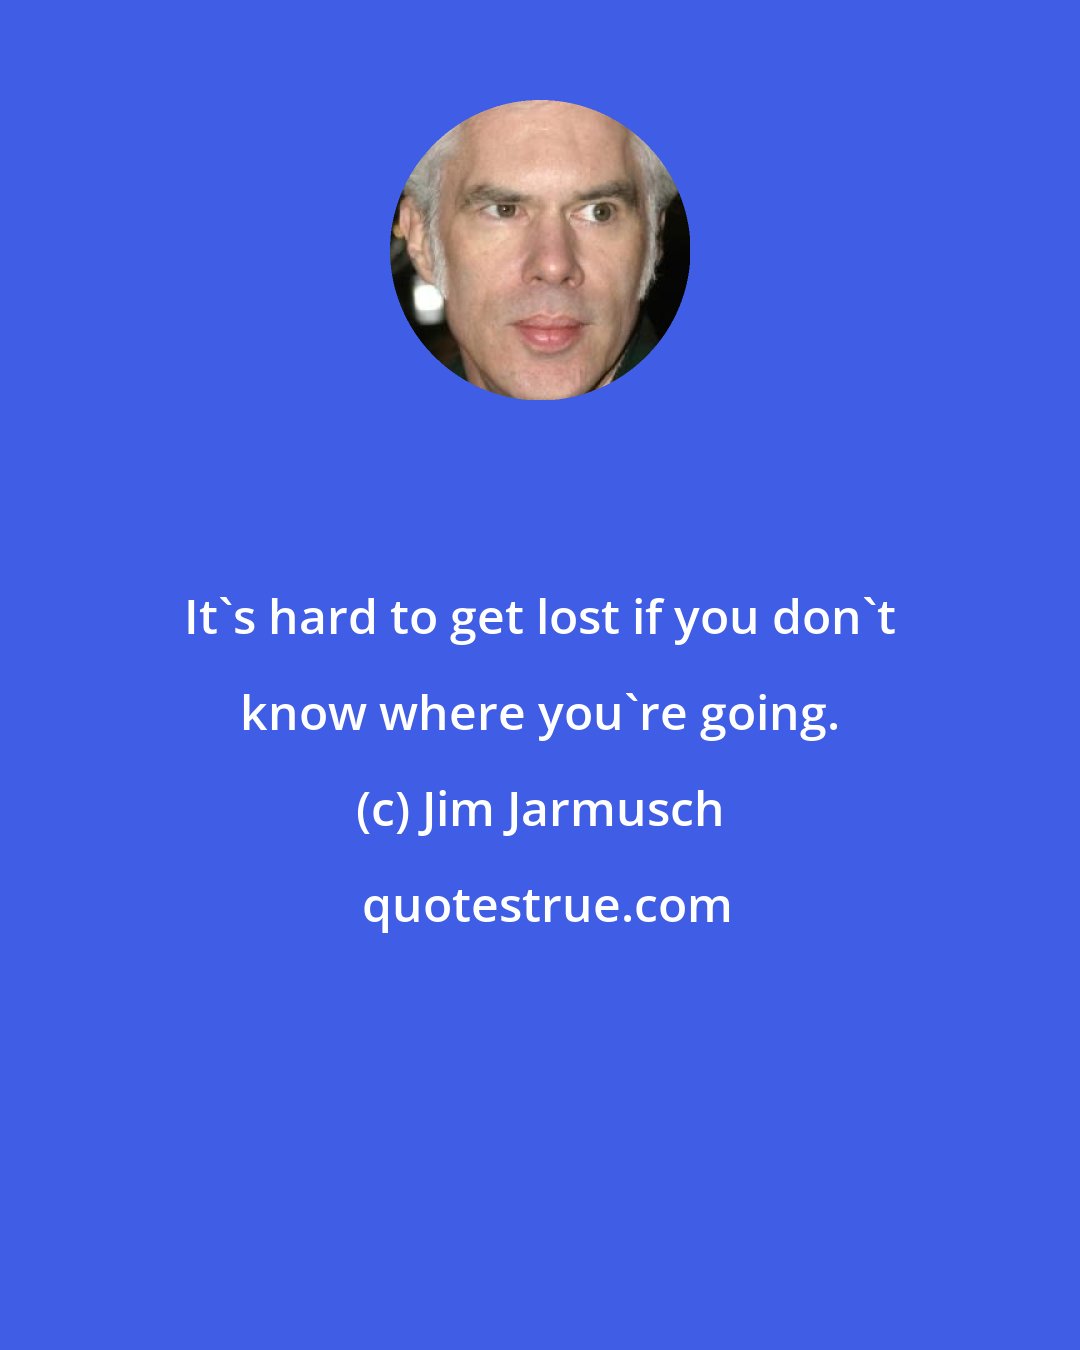 Jim Jarmusch: It's hard to get lost if you don't know where you're going.